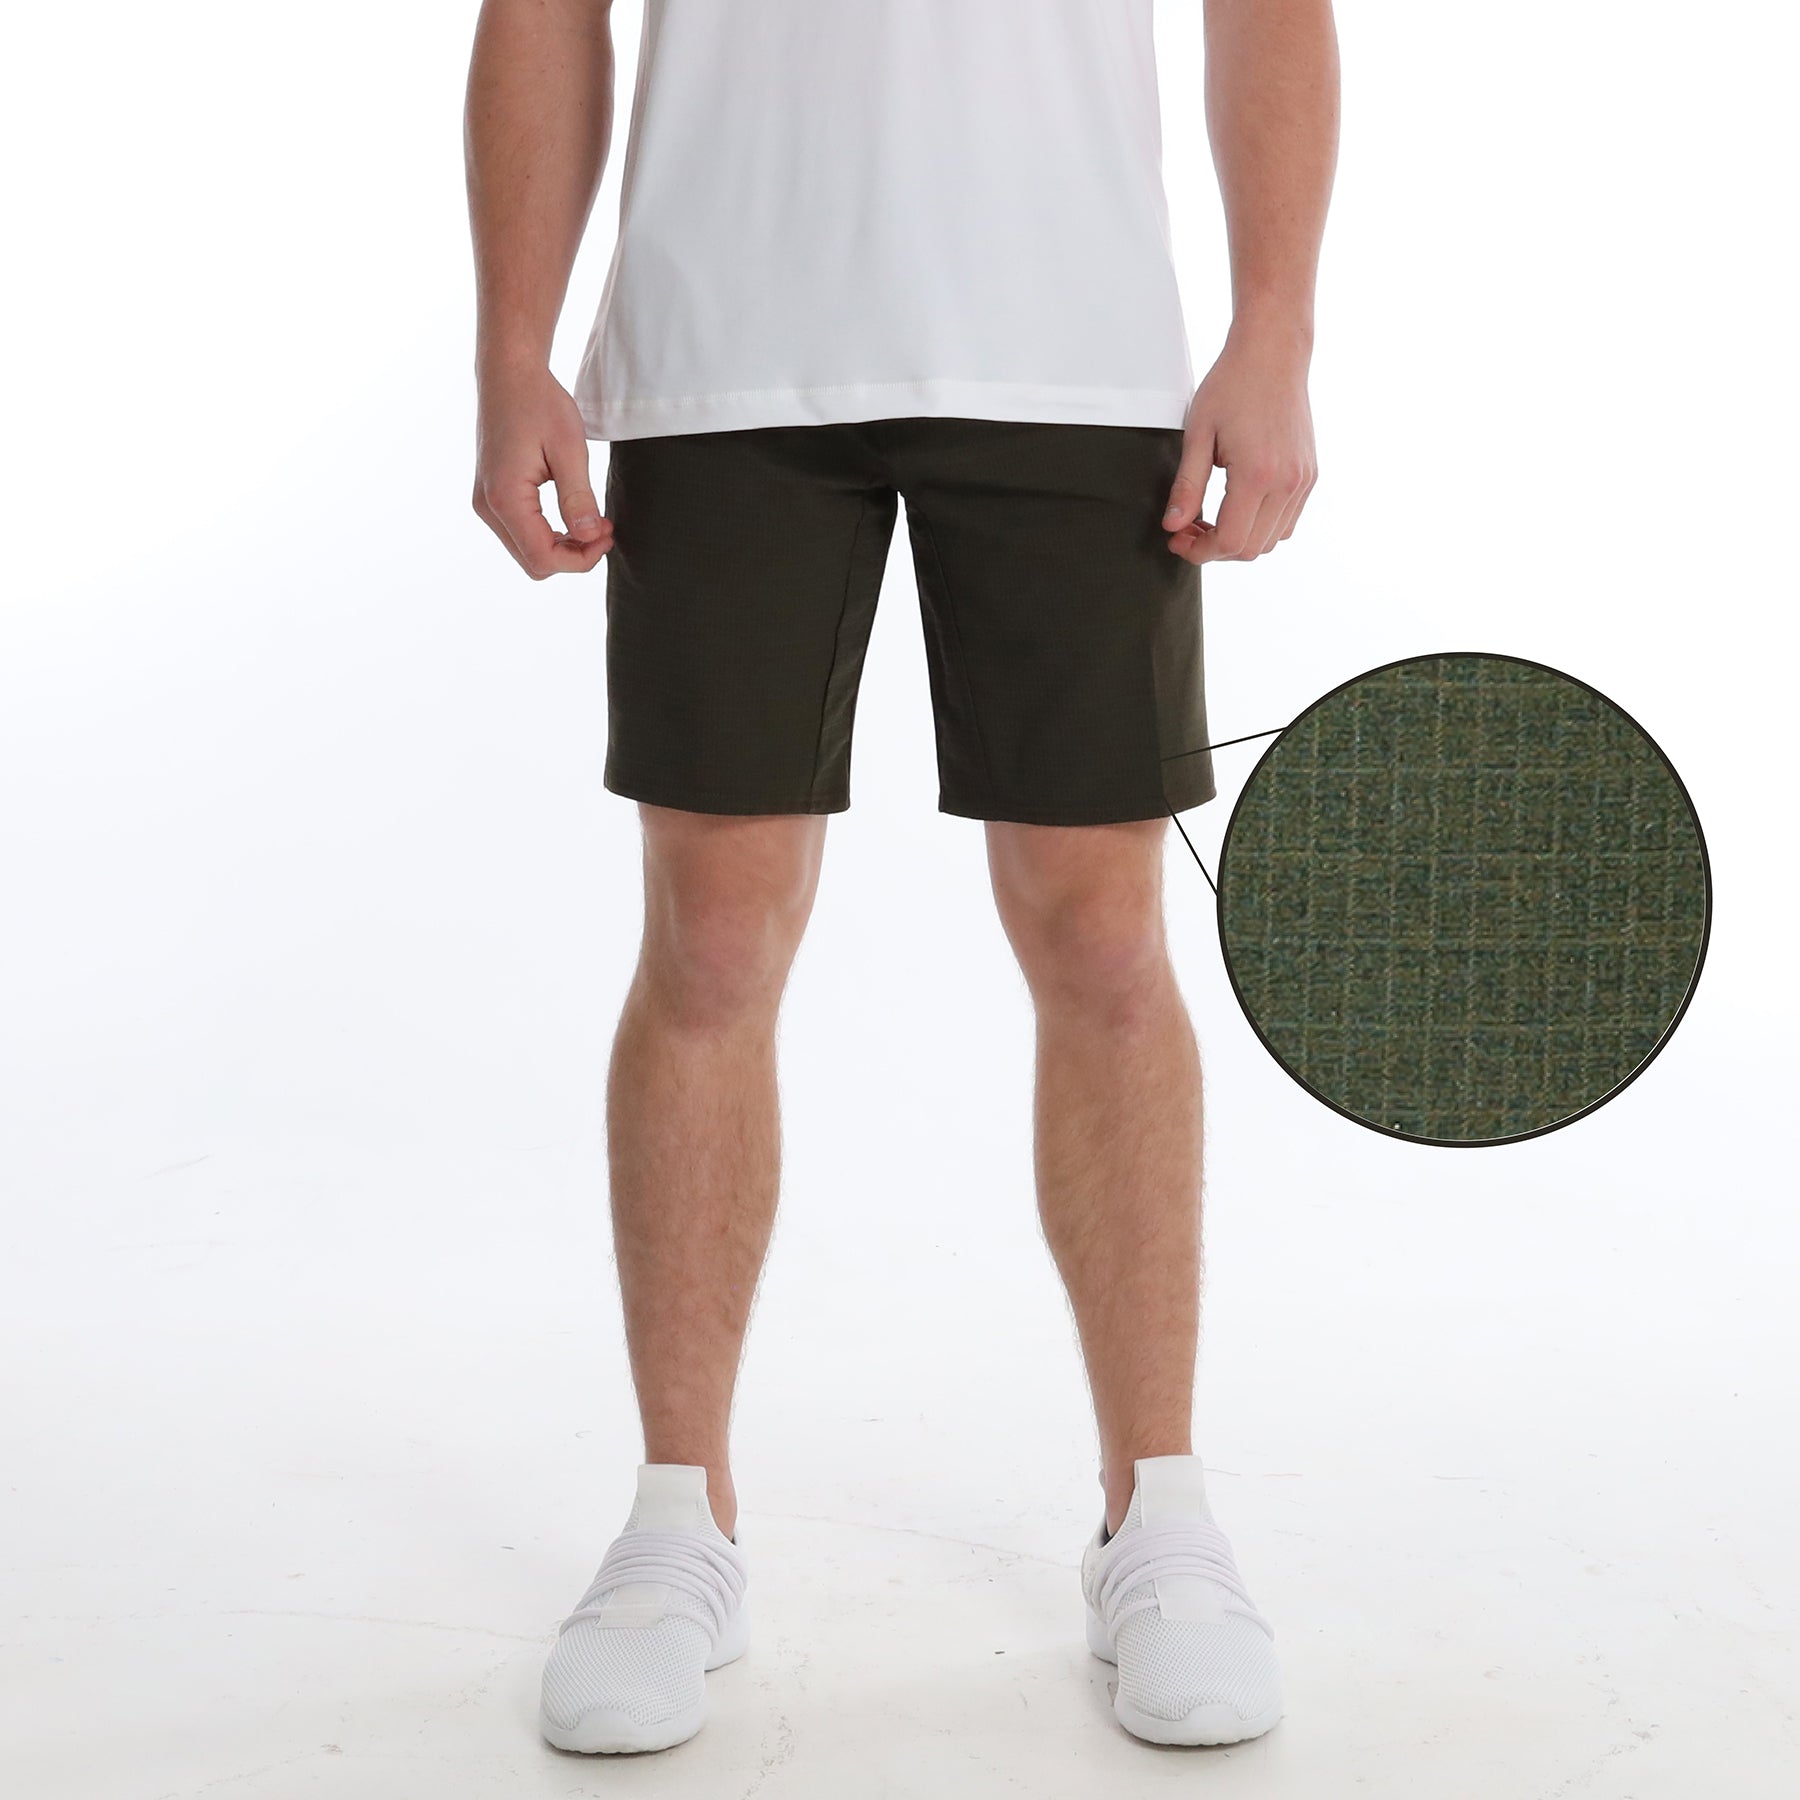 SOLUTION SHORT - ARMY GREEN